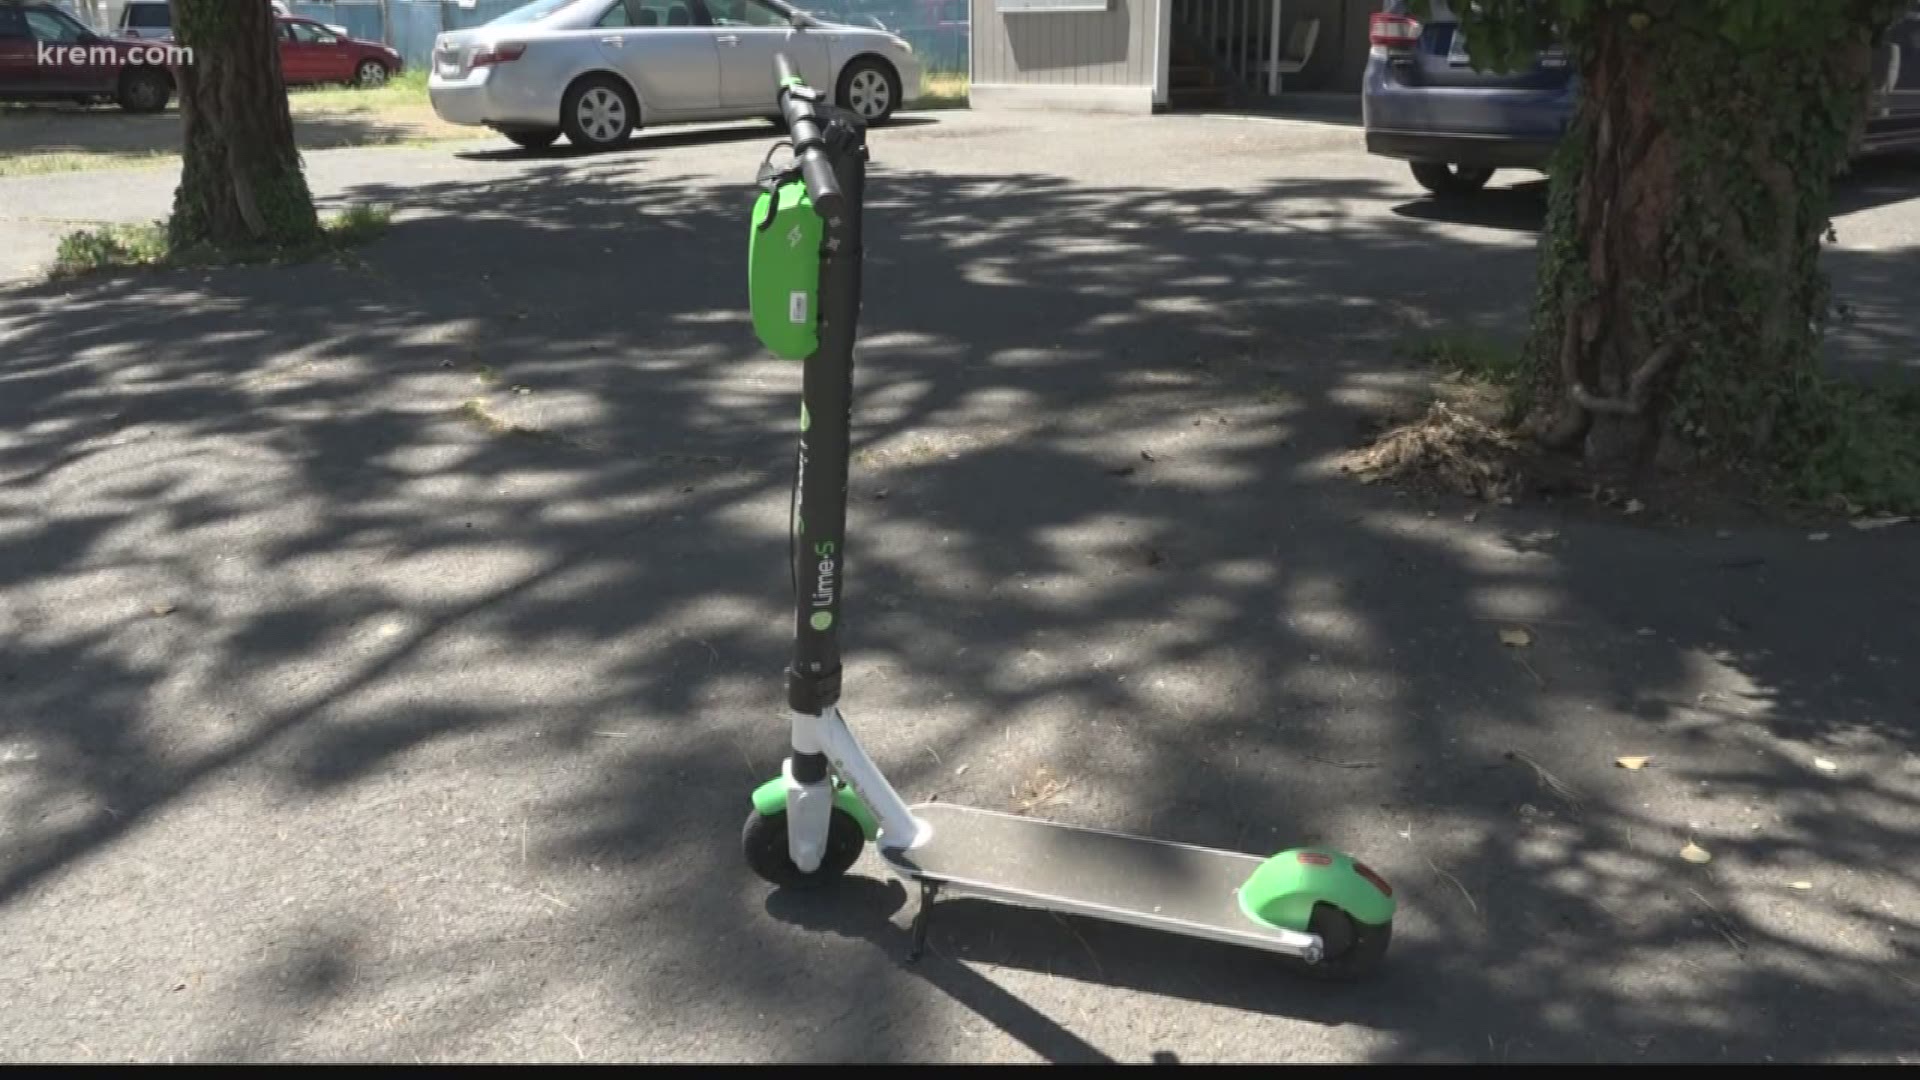 We noticed quite a few Lime Scooters venturing miles outside the core of downtown Spokane. So KREM 2's Amanda Roley went to find out what the longest trip is so far and what it can cost.